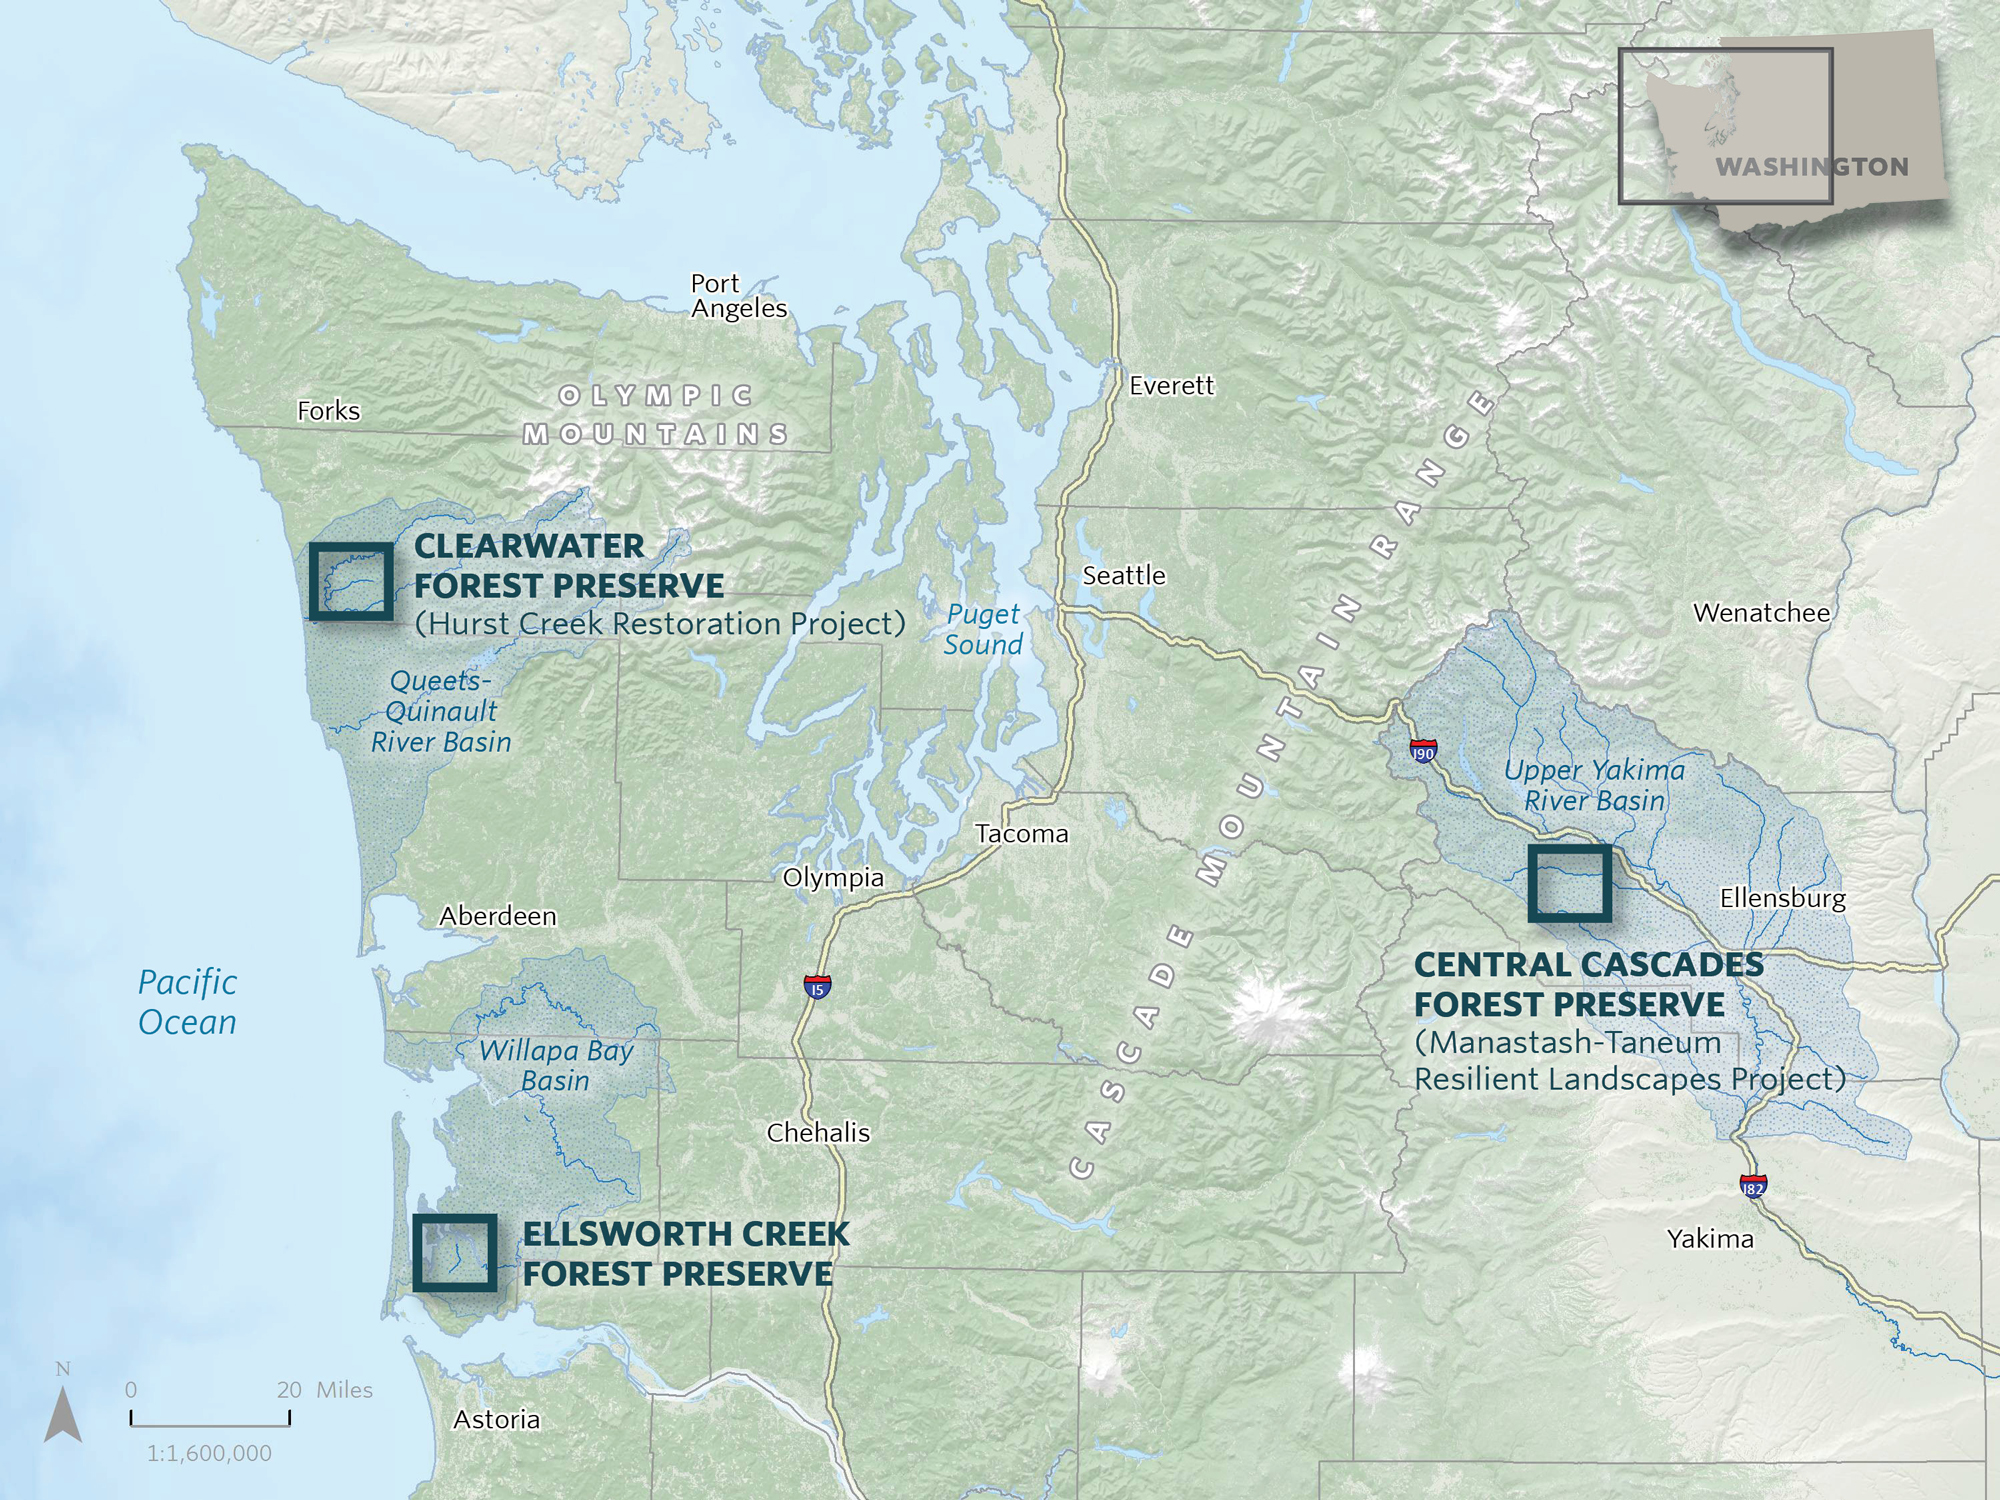 Large wood projects in Washington. Map: The Nature Conservancy (Erica Simek Sloniker)